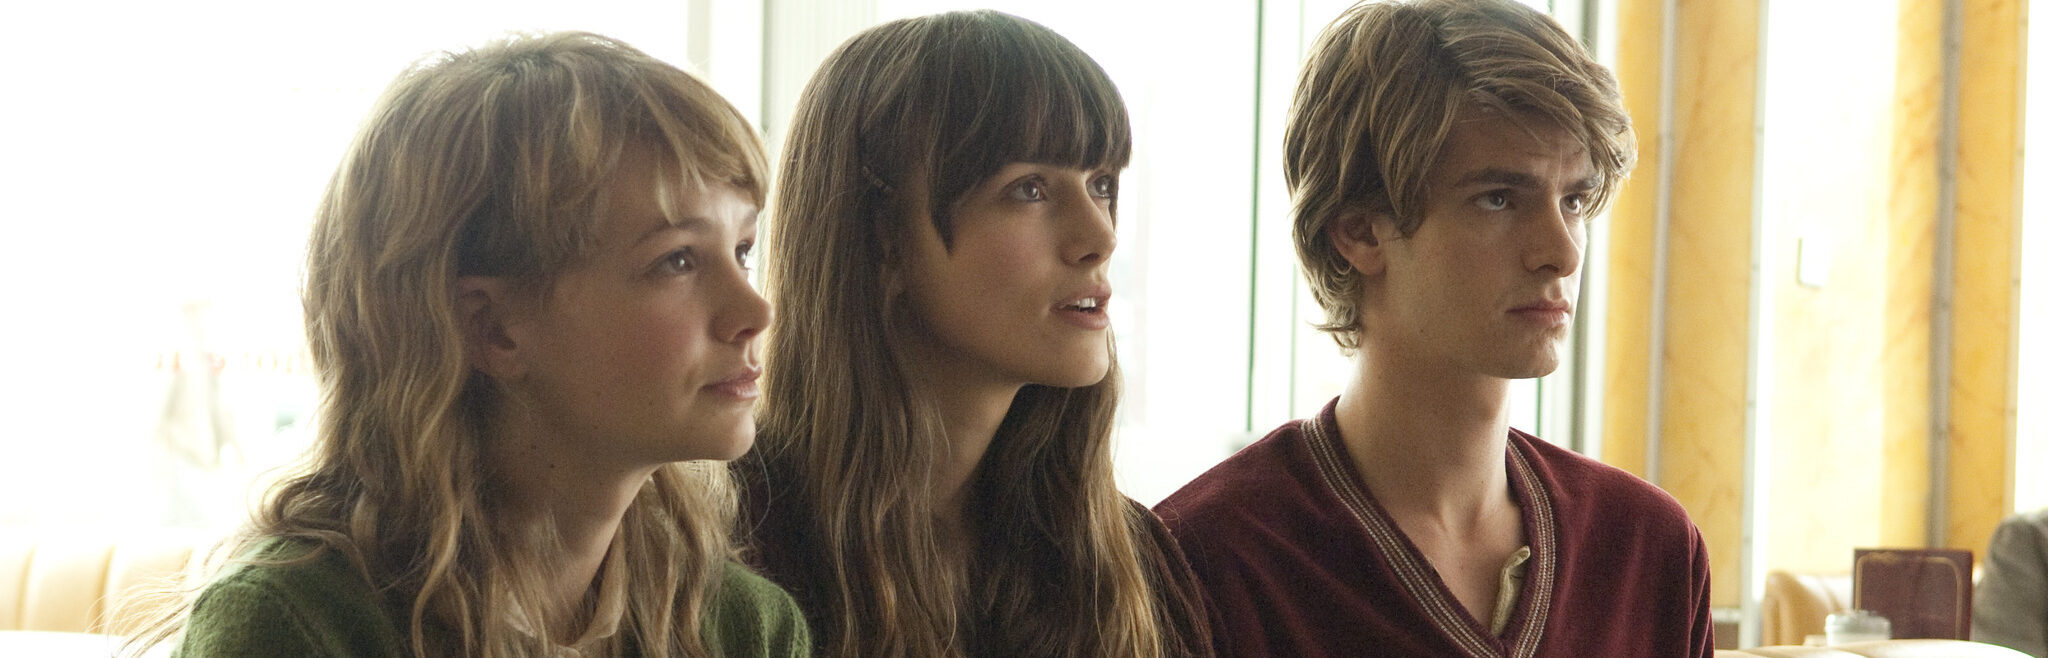 Review: Never Let Me Go